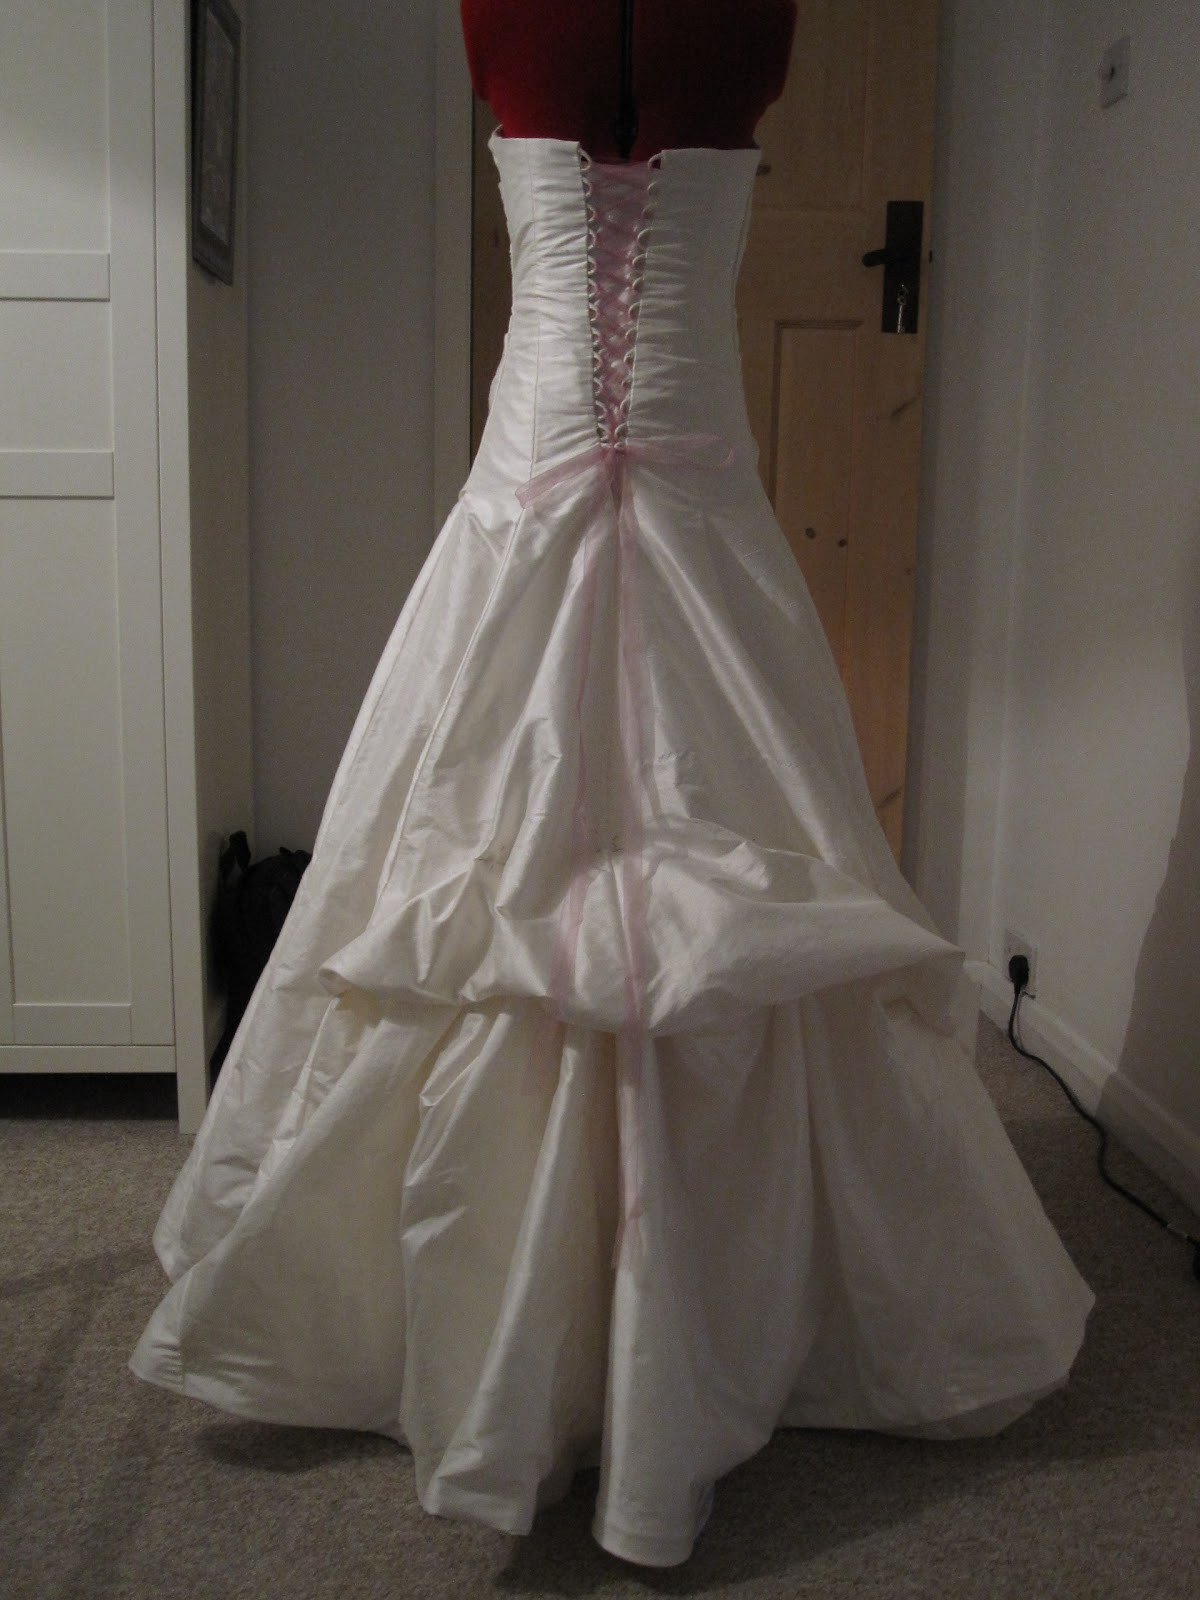 Wedding Gown Bustle
 Queen of Darts hustle and bustle the hem of the